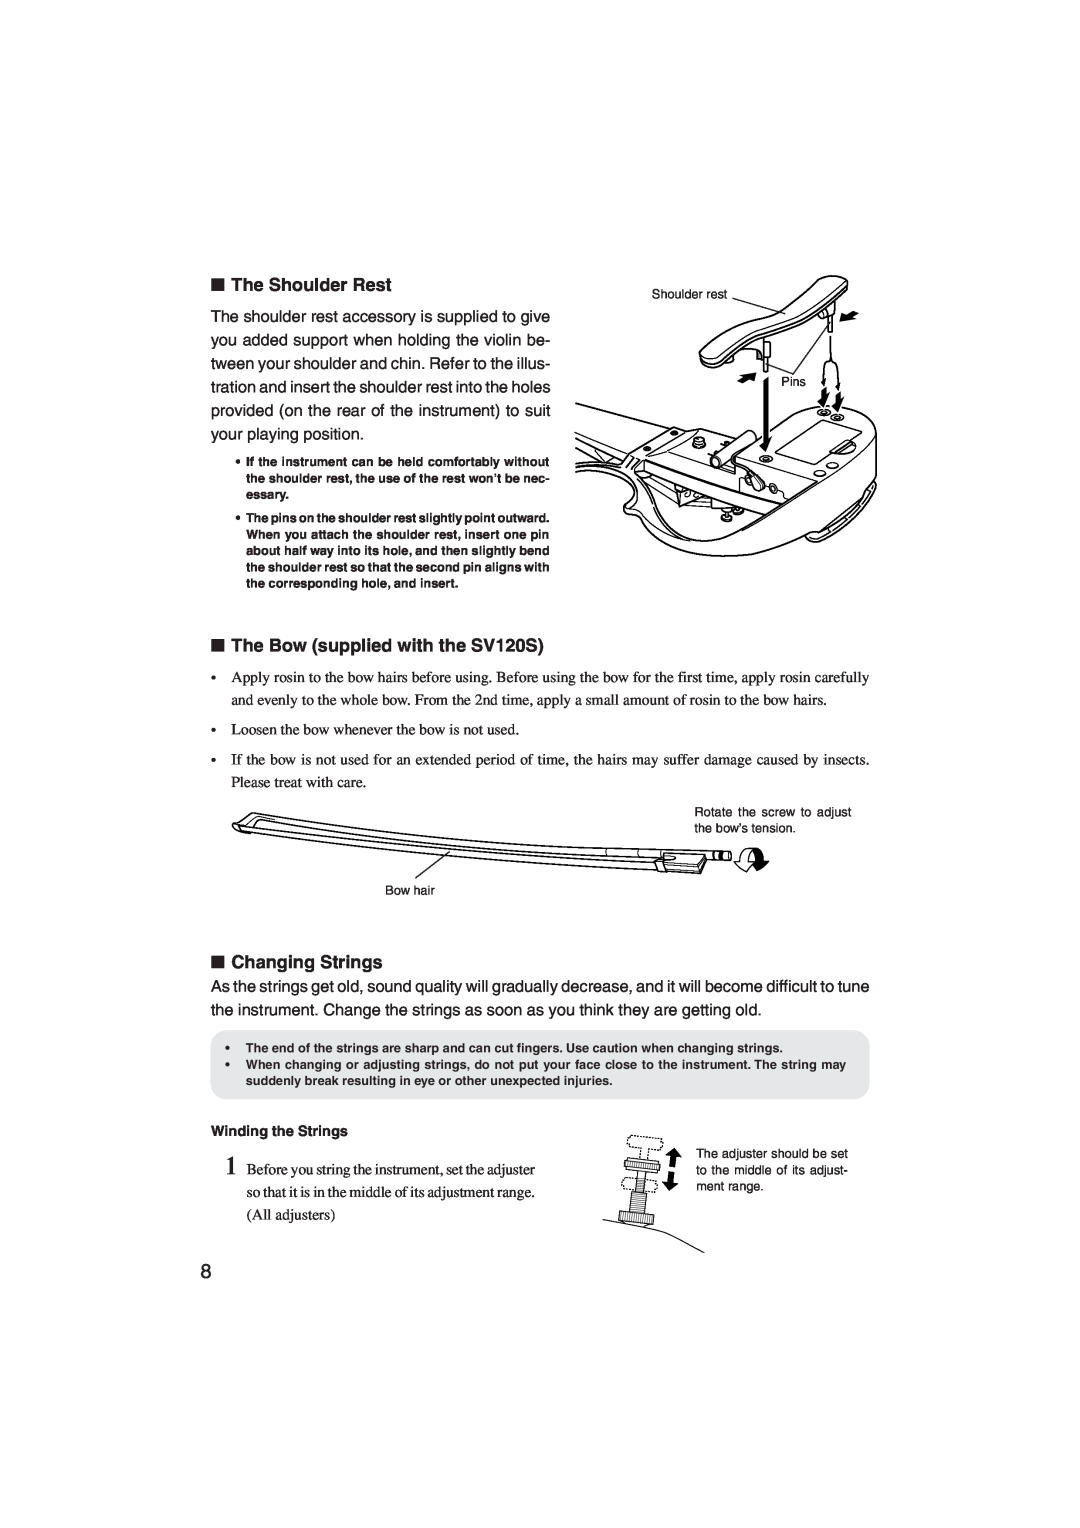 Yamaha Sv 120 owner manual The Shoulder Rest, The Bow supplied with the SV120S, Changing Strings, Winding the Strings 